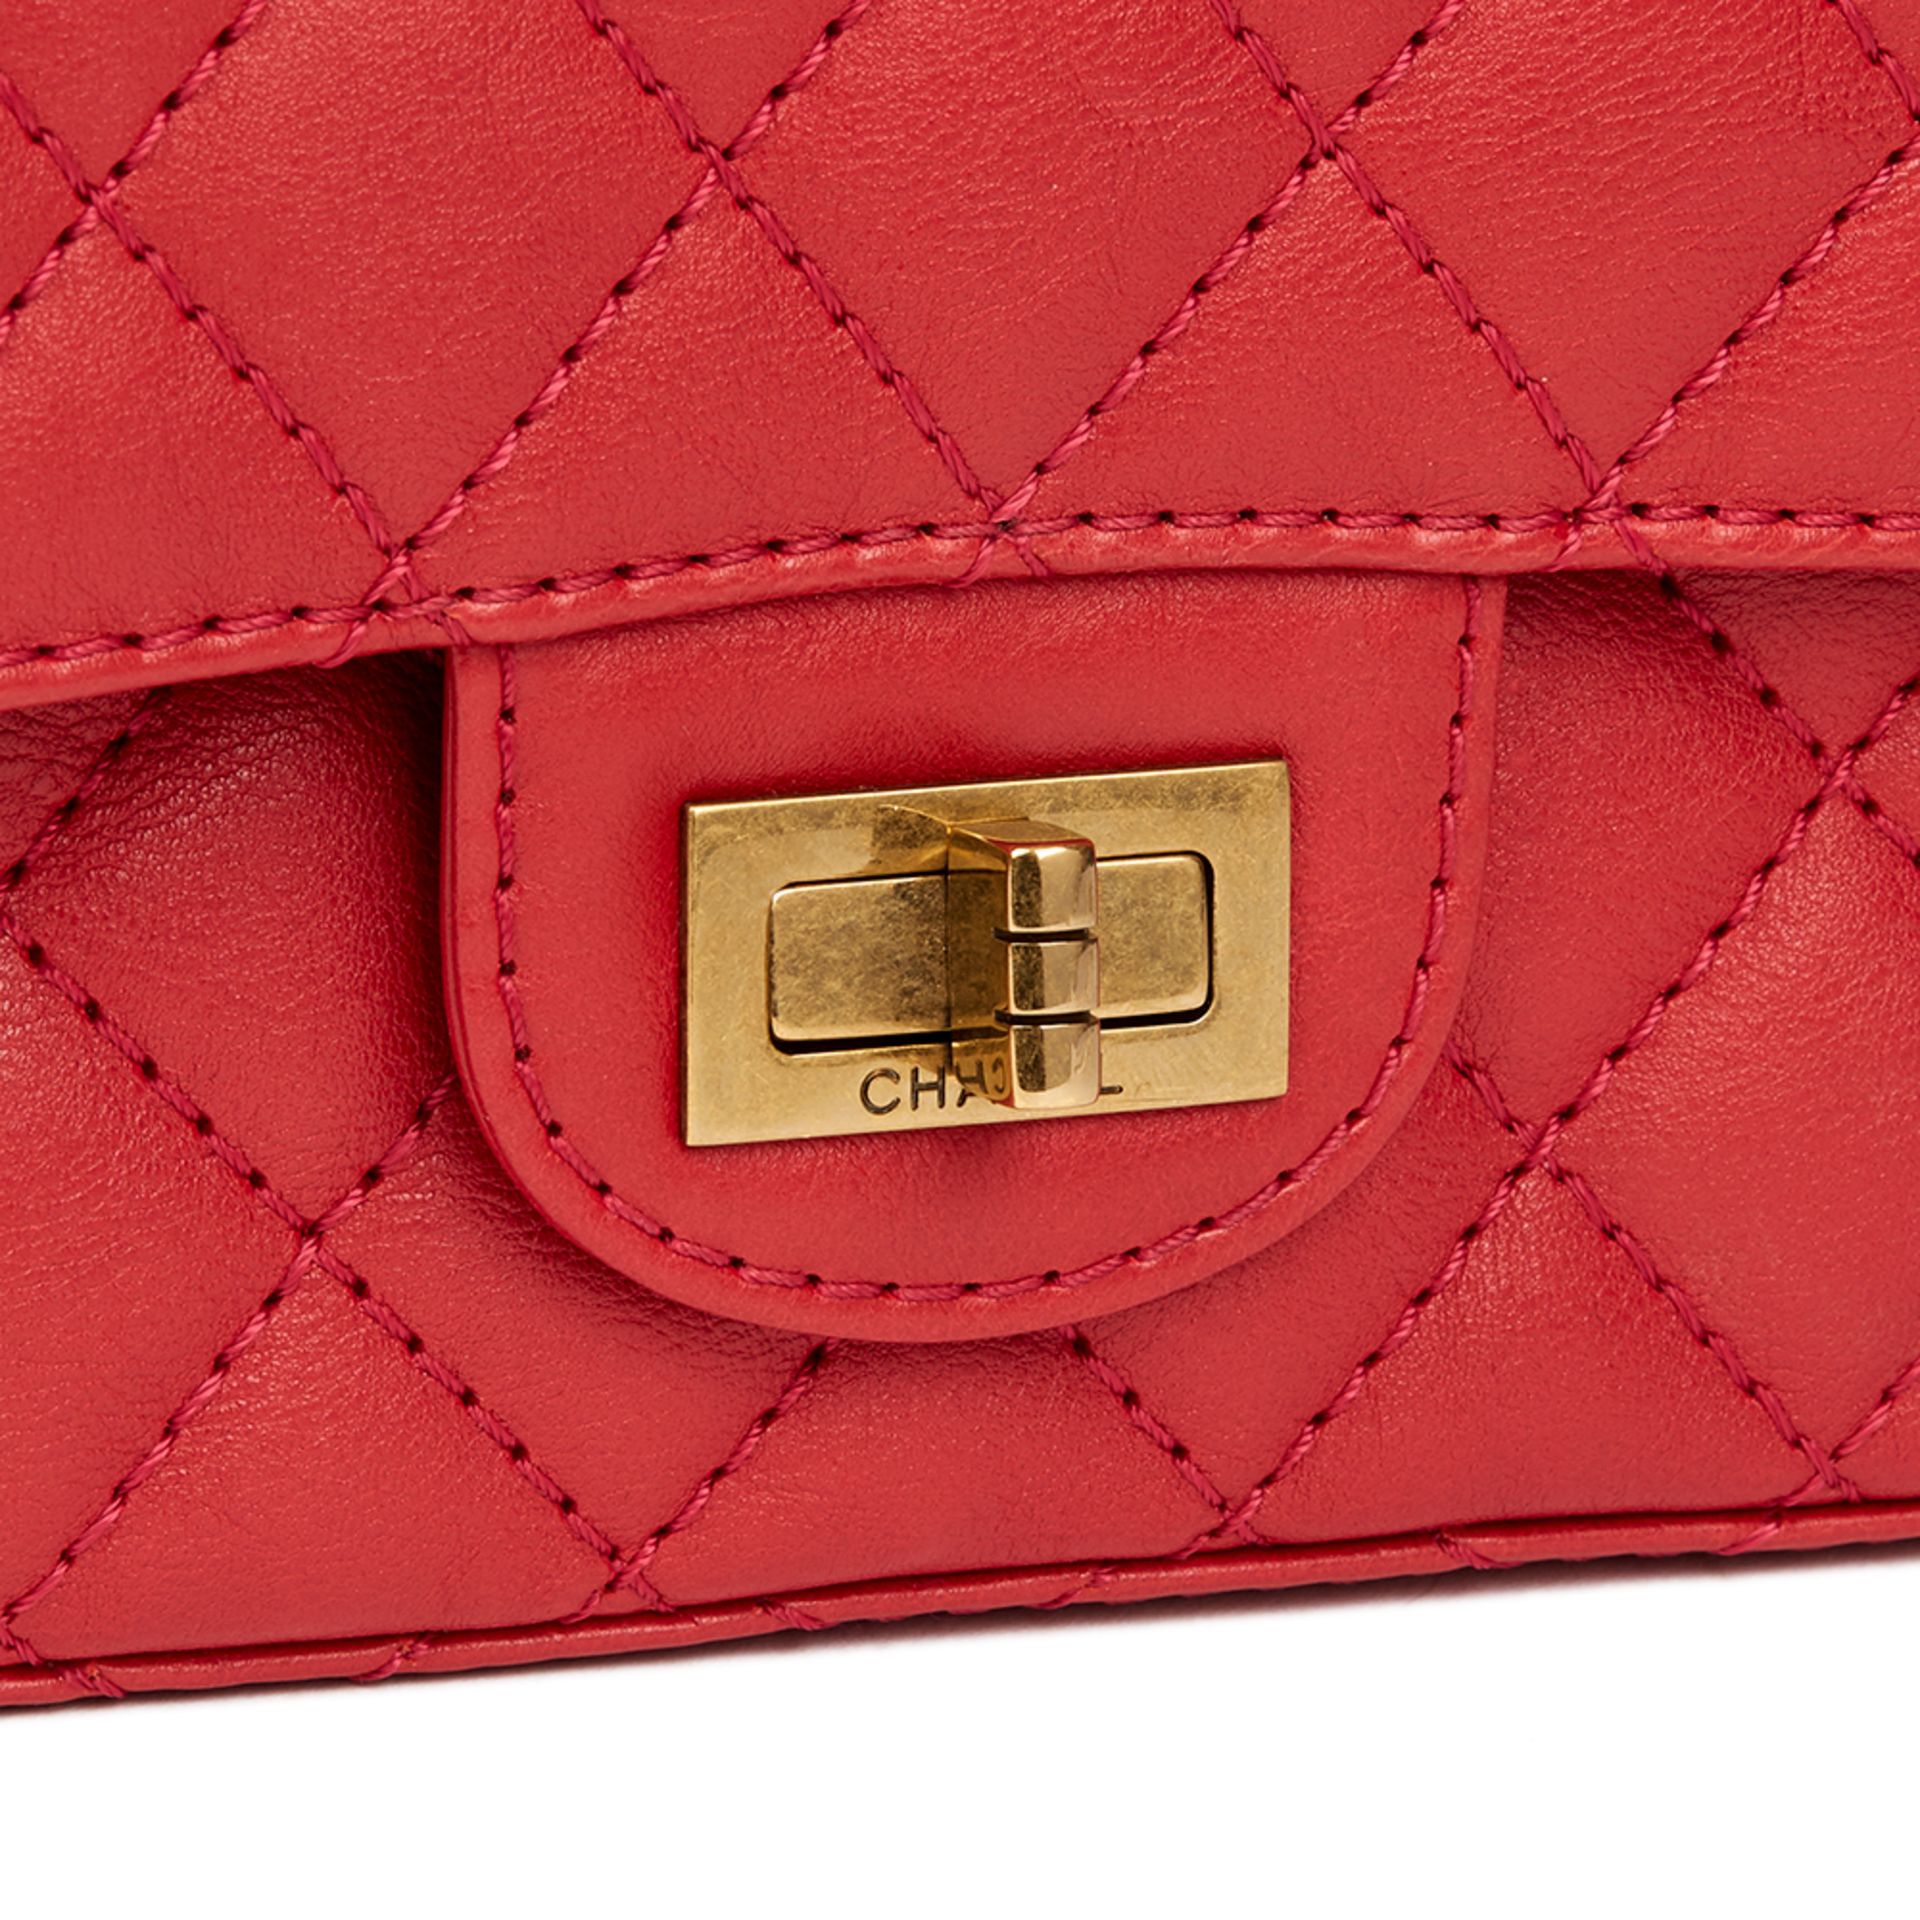 Chanel Red Quilted Calfskin Leather 2.55 Reissue 224 Double Flap Bag - Image 6 of 10